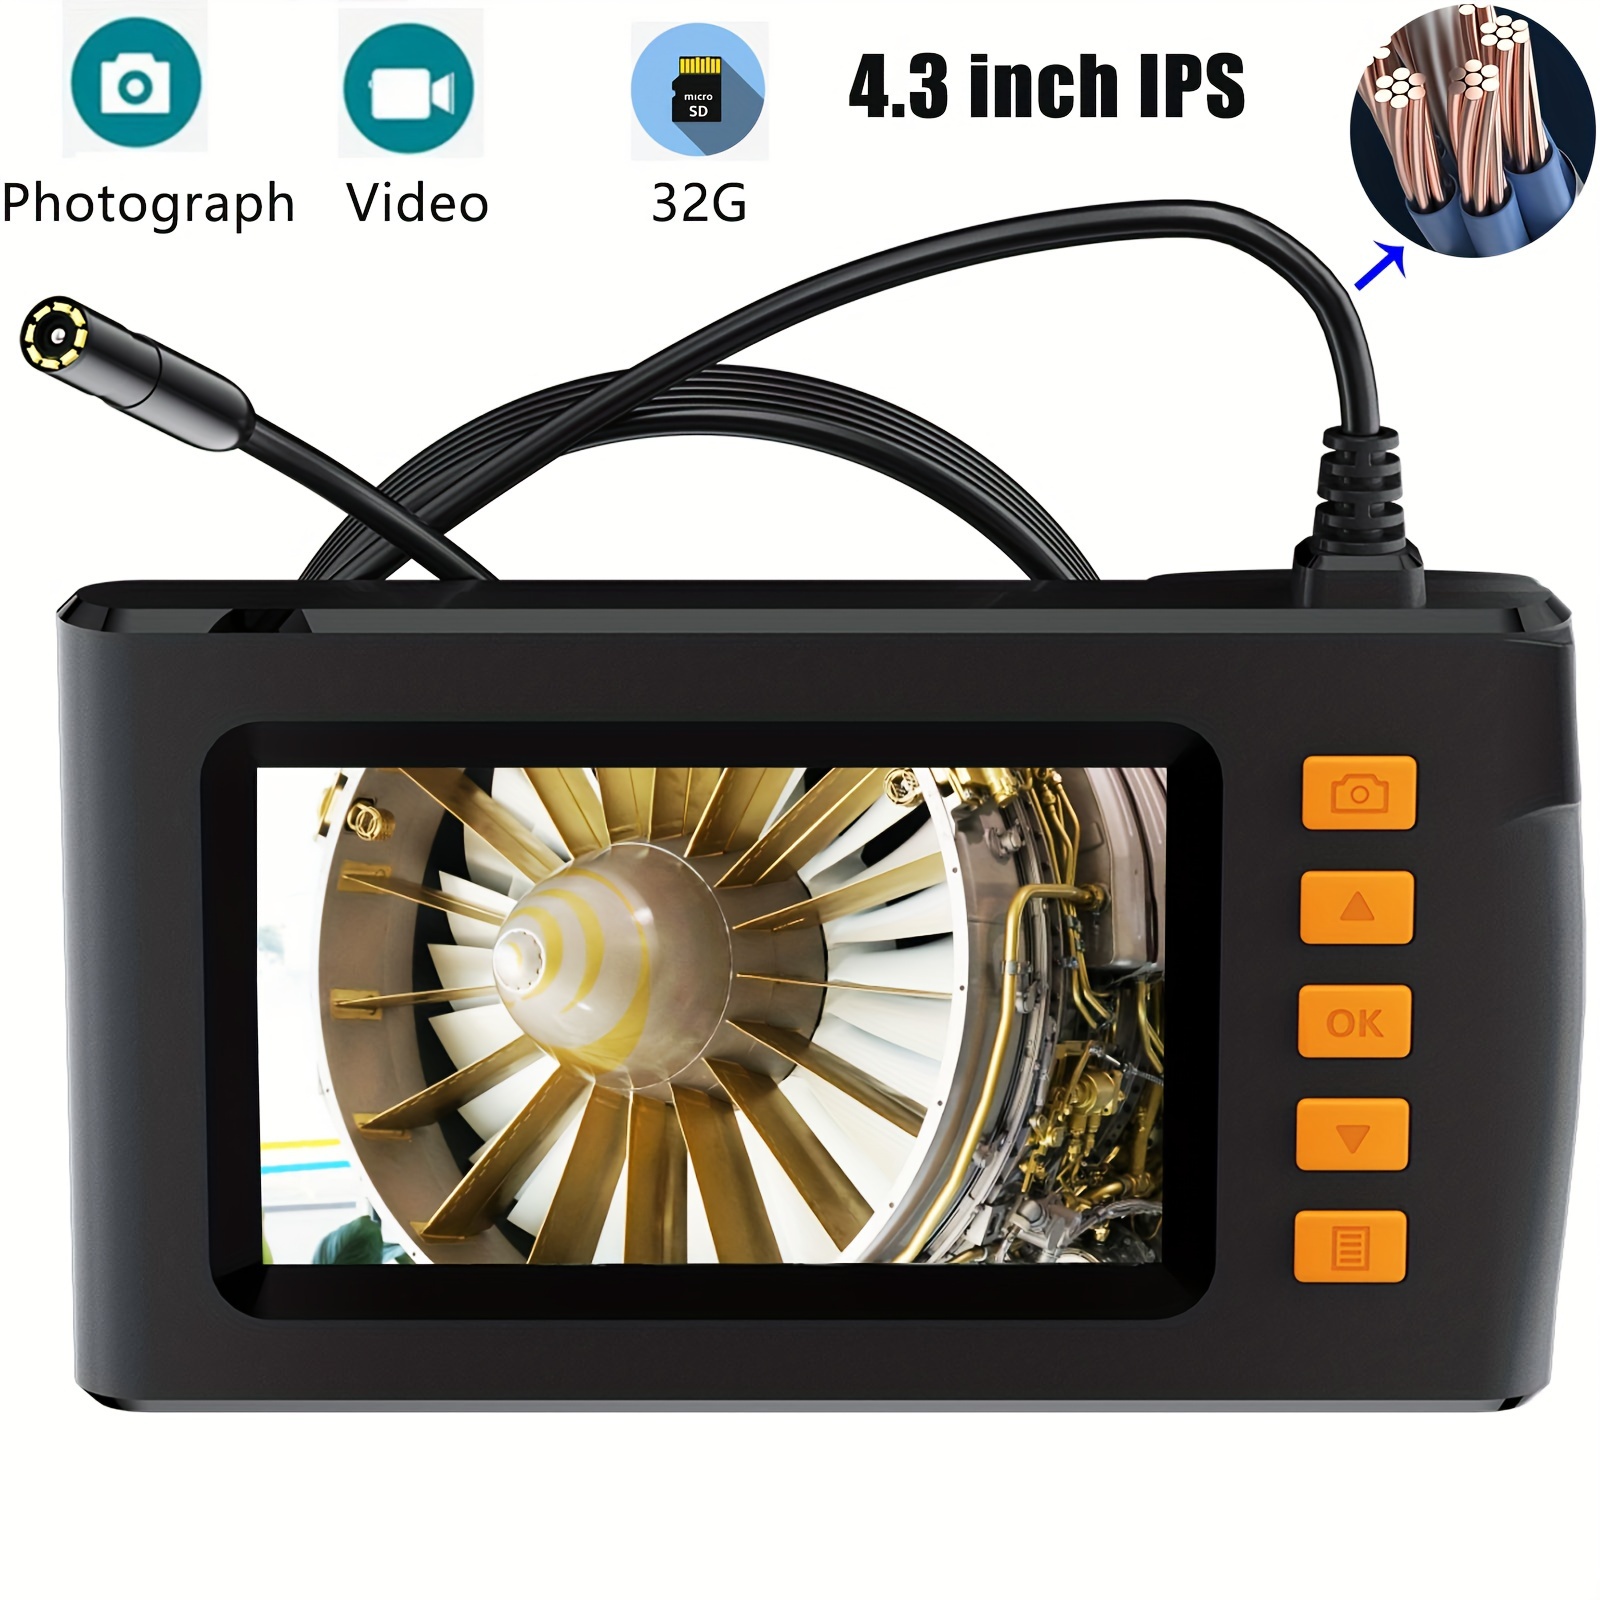  Industrial Endoscope, 1080P HD Digital Borescope Inspection  Camera with 8mm IP67 Waterproof Camera, Sewer Camera with 2.8 IPS Screen,  16.5FT Semi-Rigid Cable. : Industrial & Scientific